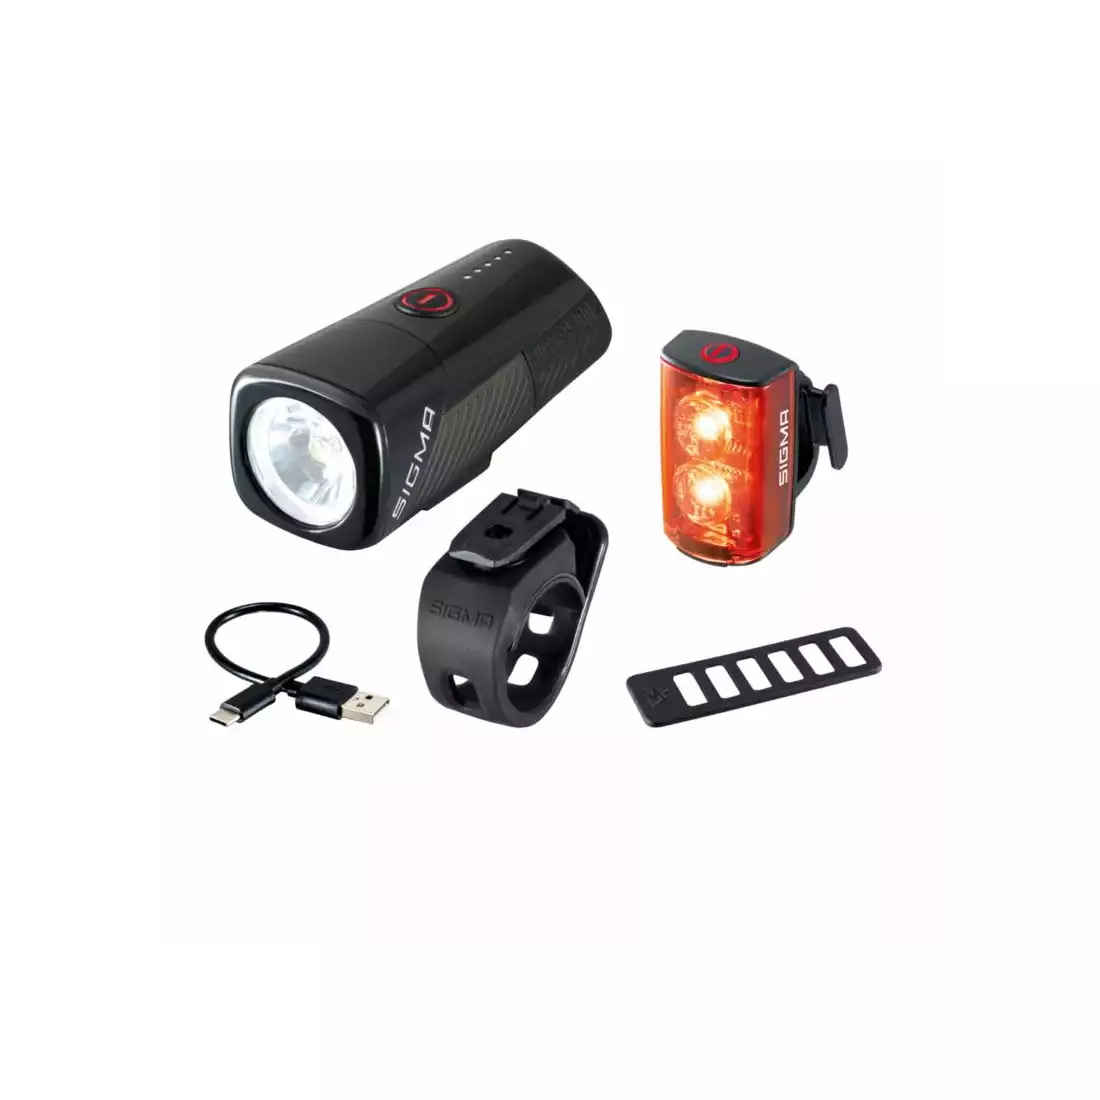 SIGMA bicycle light set front BUSTER 400 + rear BUSTER RL 80